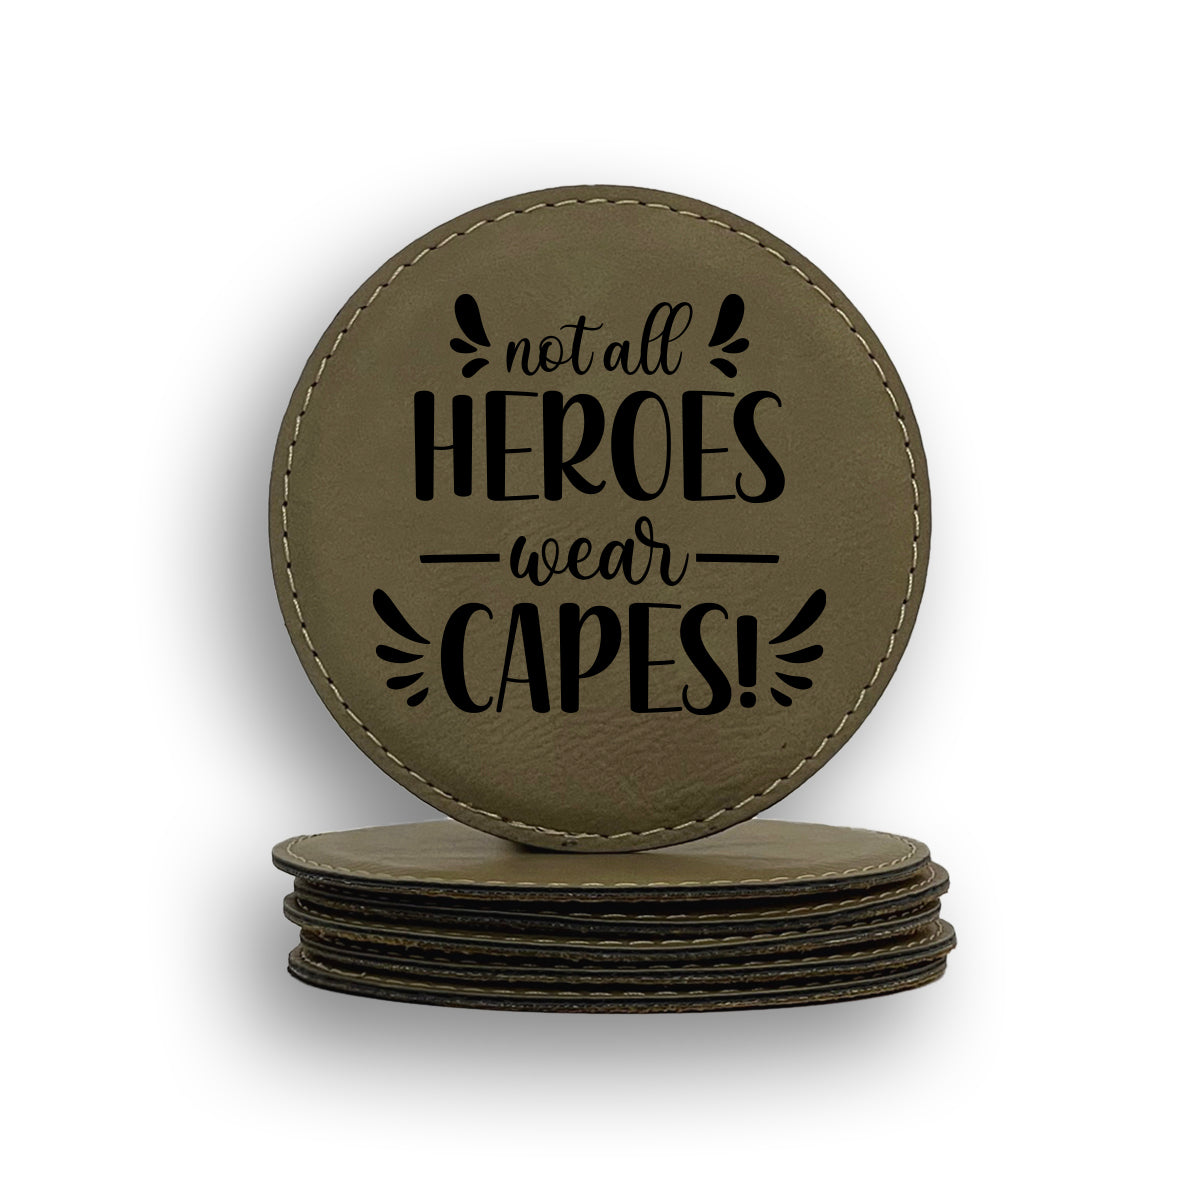 Not all Heroes Coaster